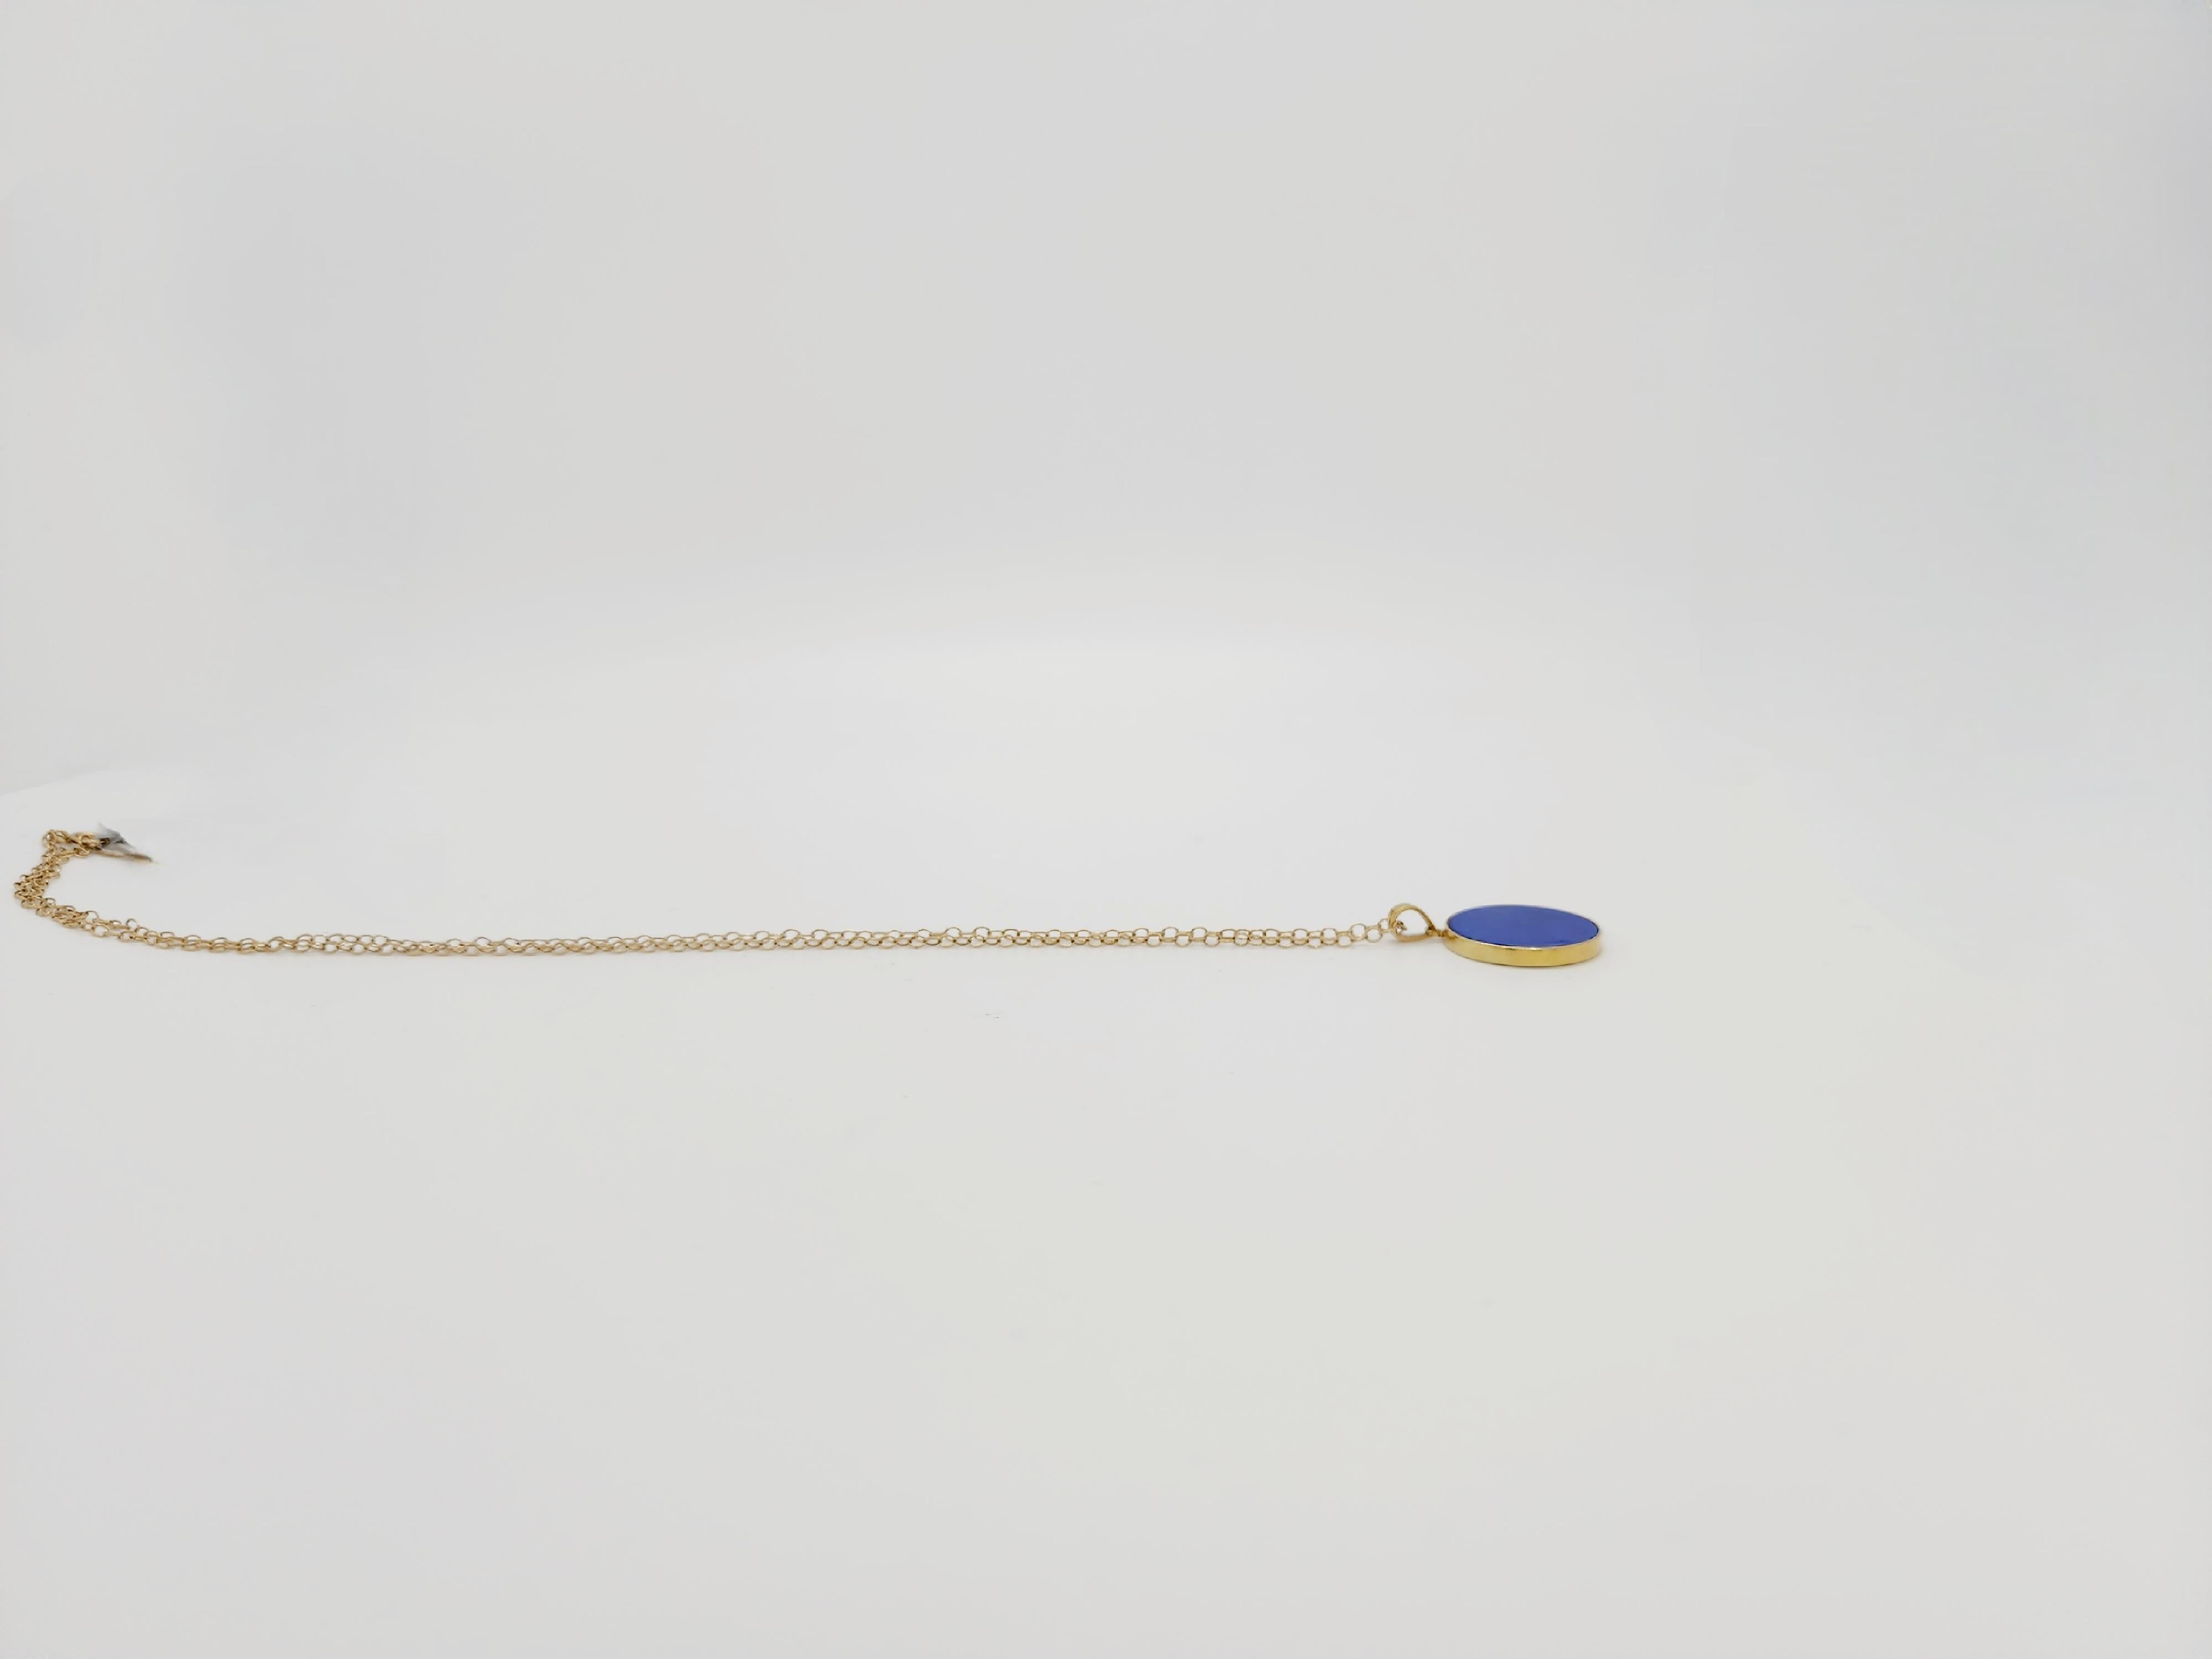  Lapis Lazuli Necklace in 14k Yellow Gold For Sale 1